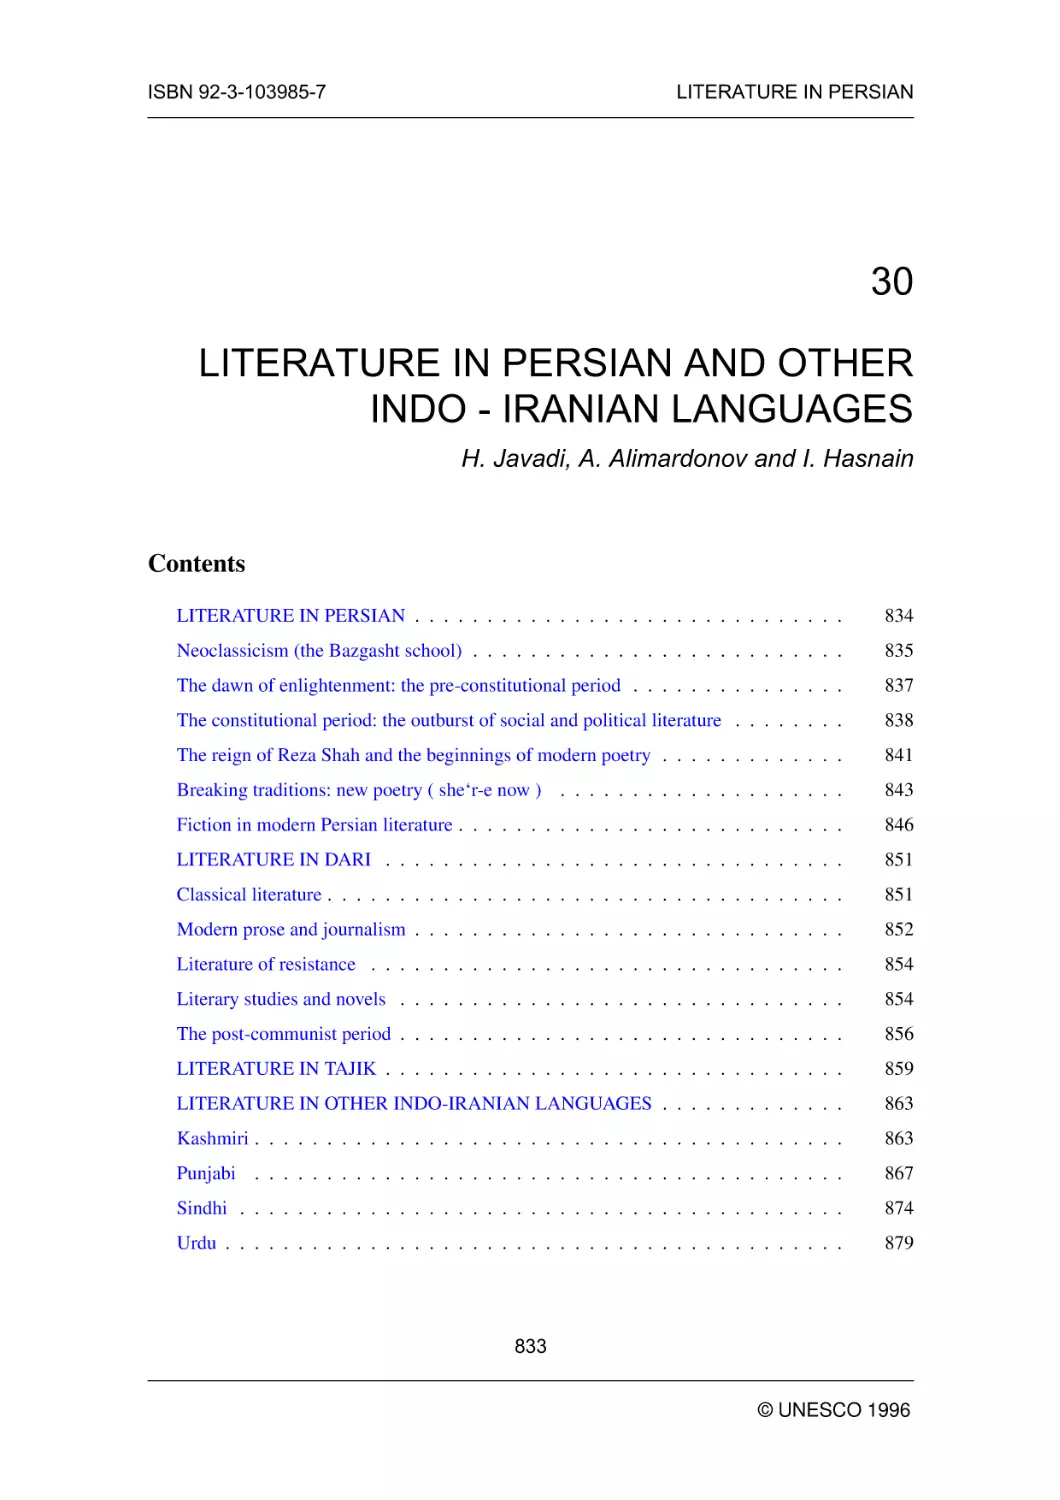 LITERATURE IN PERSIAN AND OTHER INDO - IRANIAN LANGUAGES